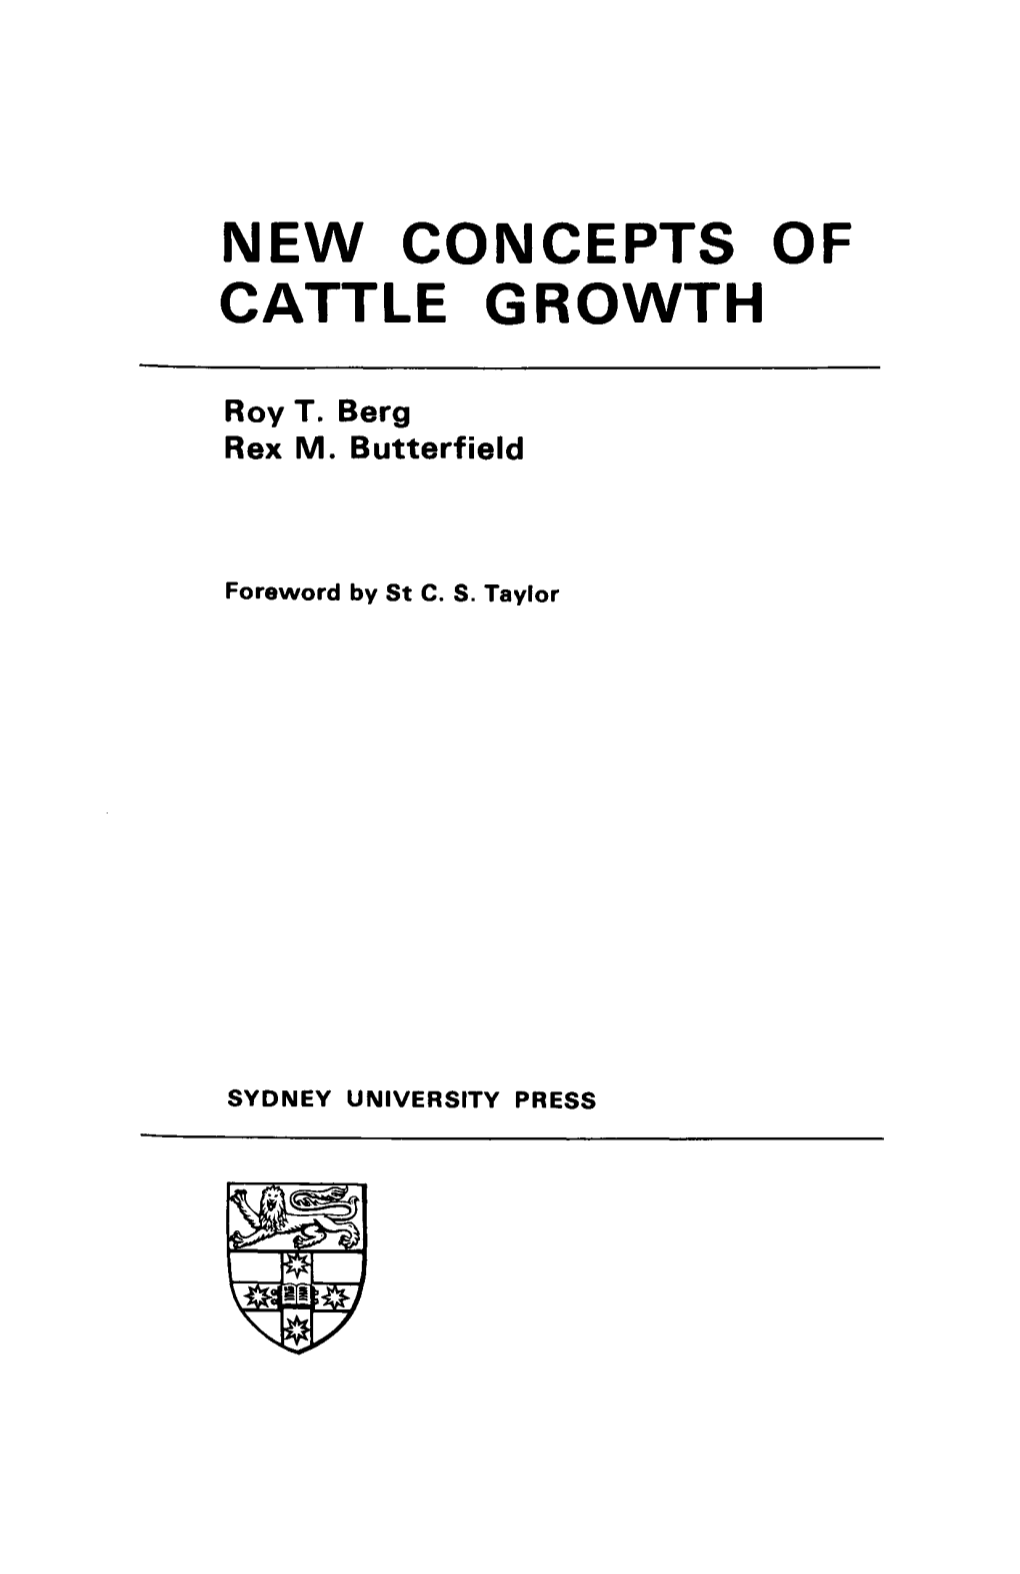 New Concepts of Cattle Growth